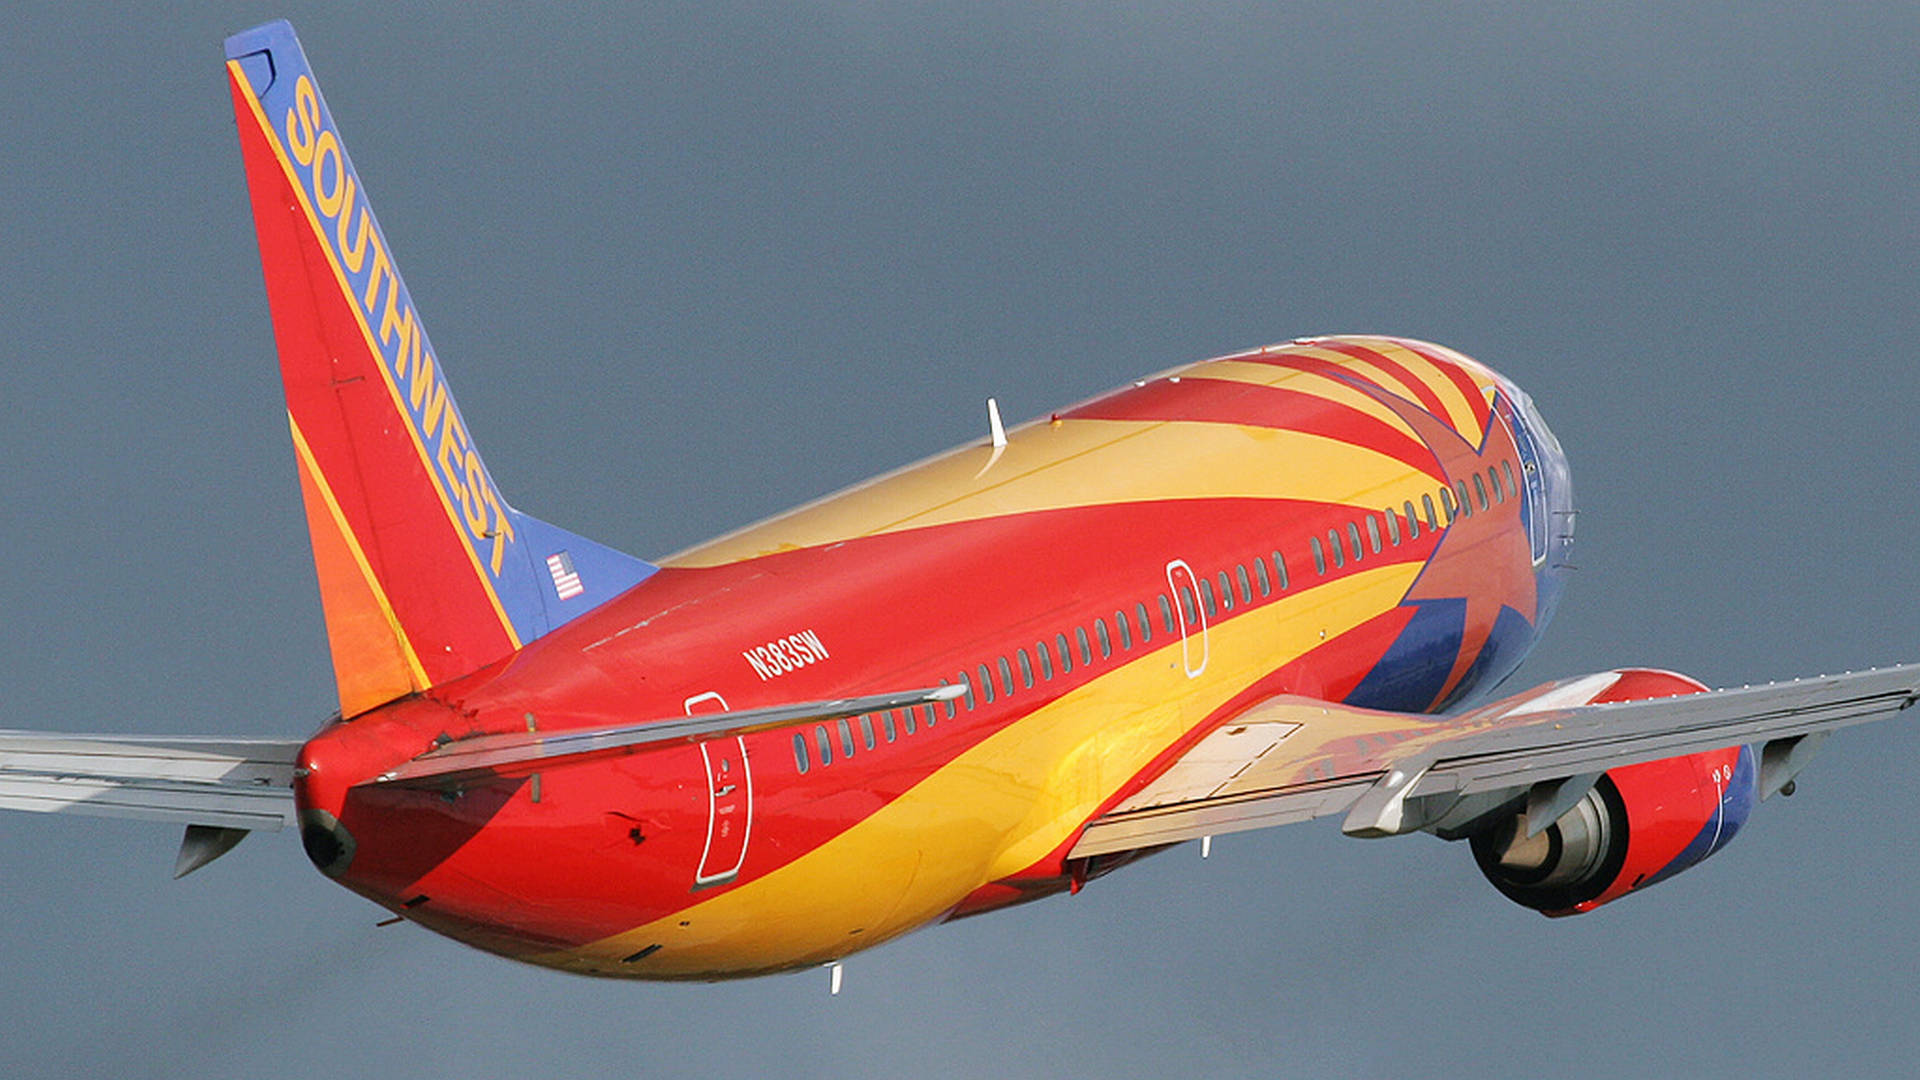 Southwest Airlines 3840 X 2160 Wallpaper